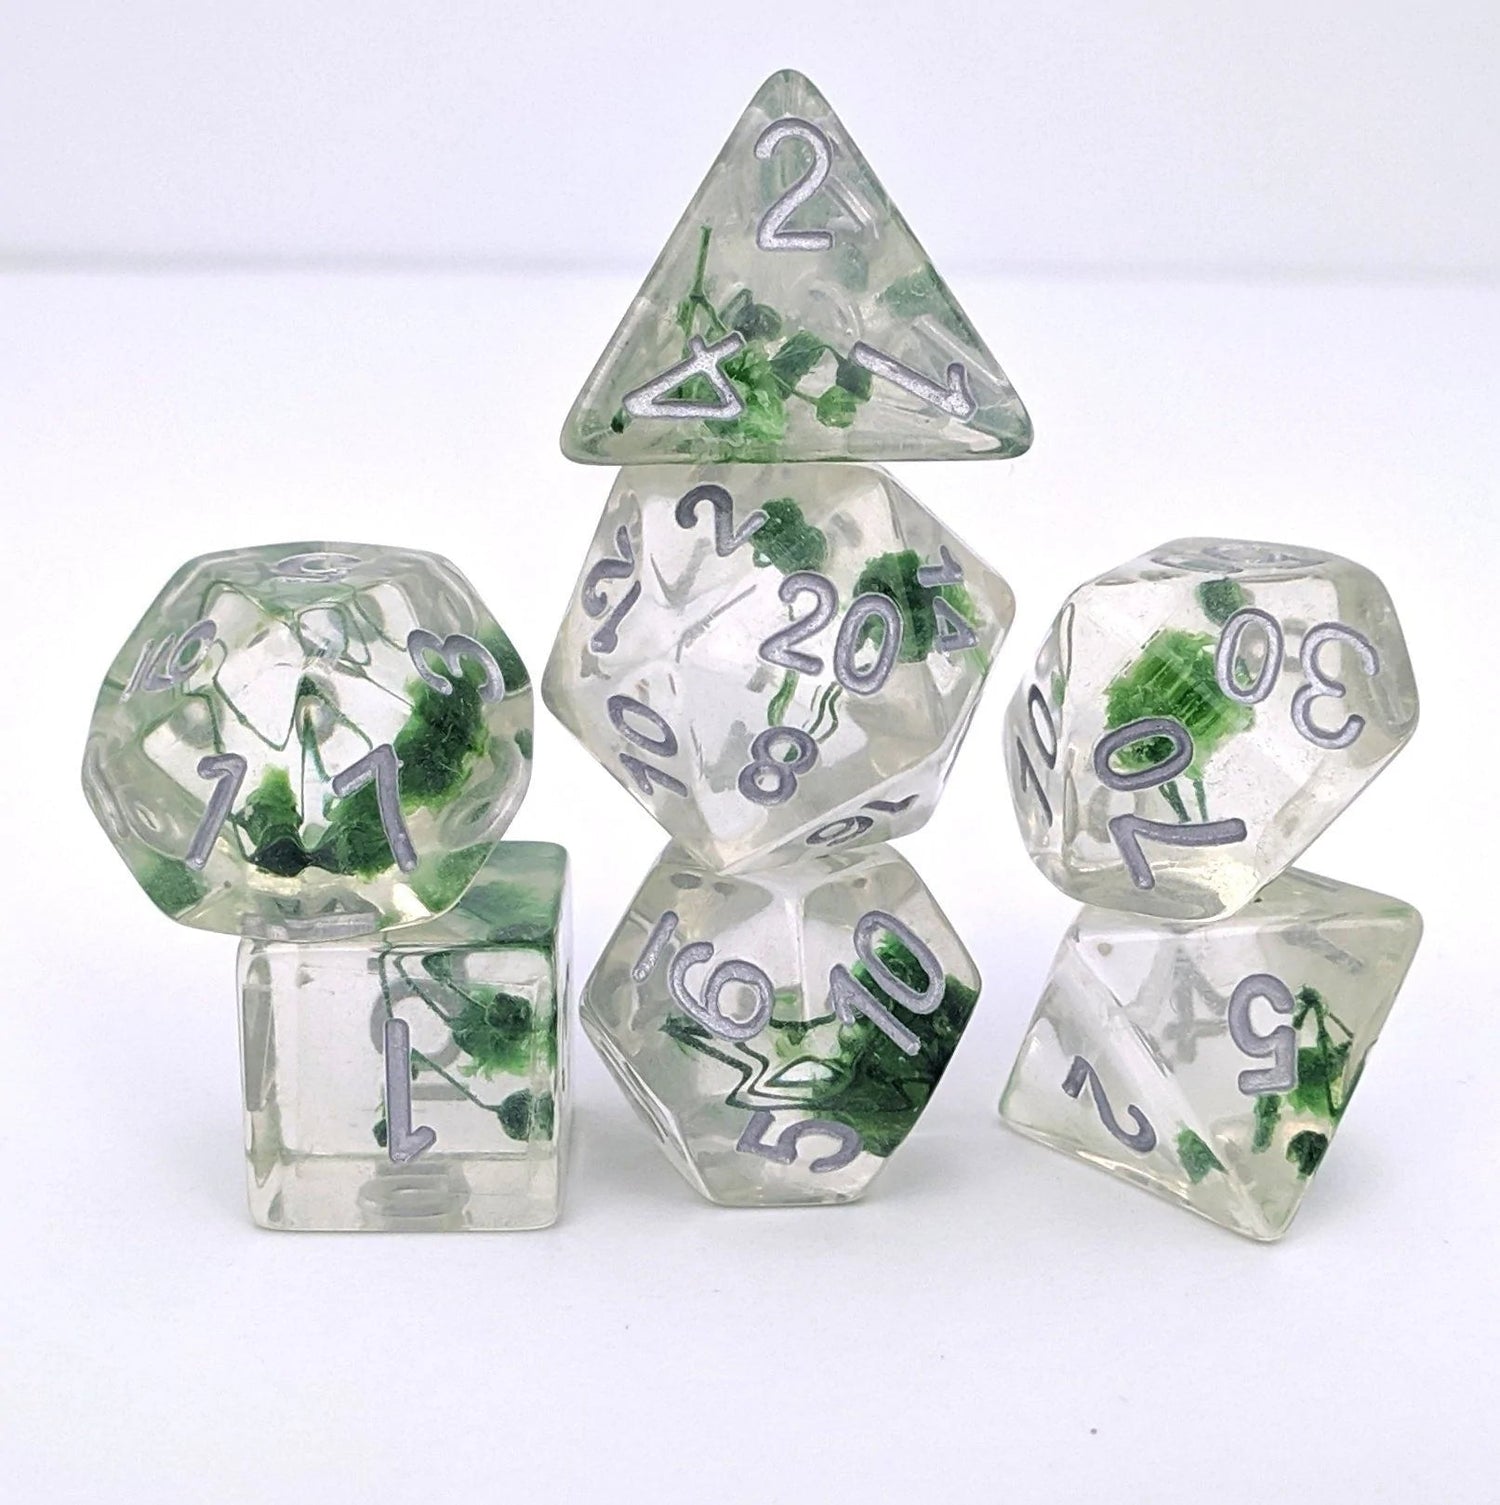 Baby's Breath - 7 Dice Set (Green Flowers) - The Fourth Place